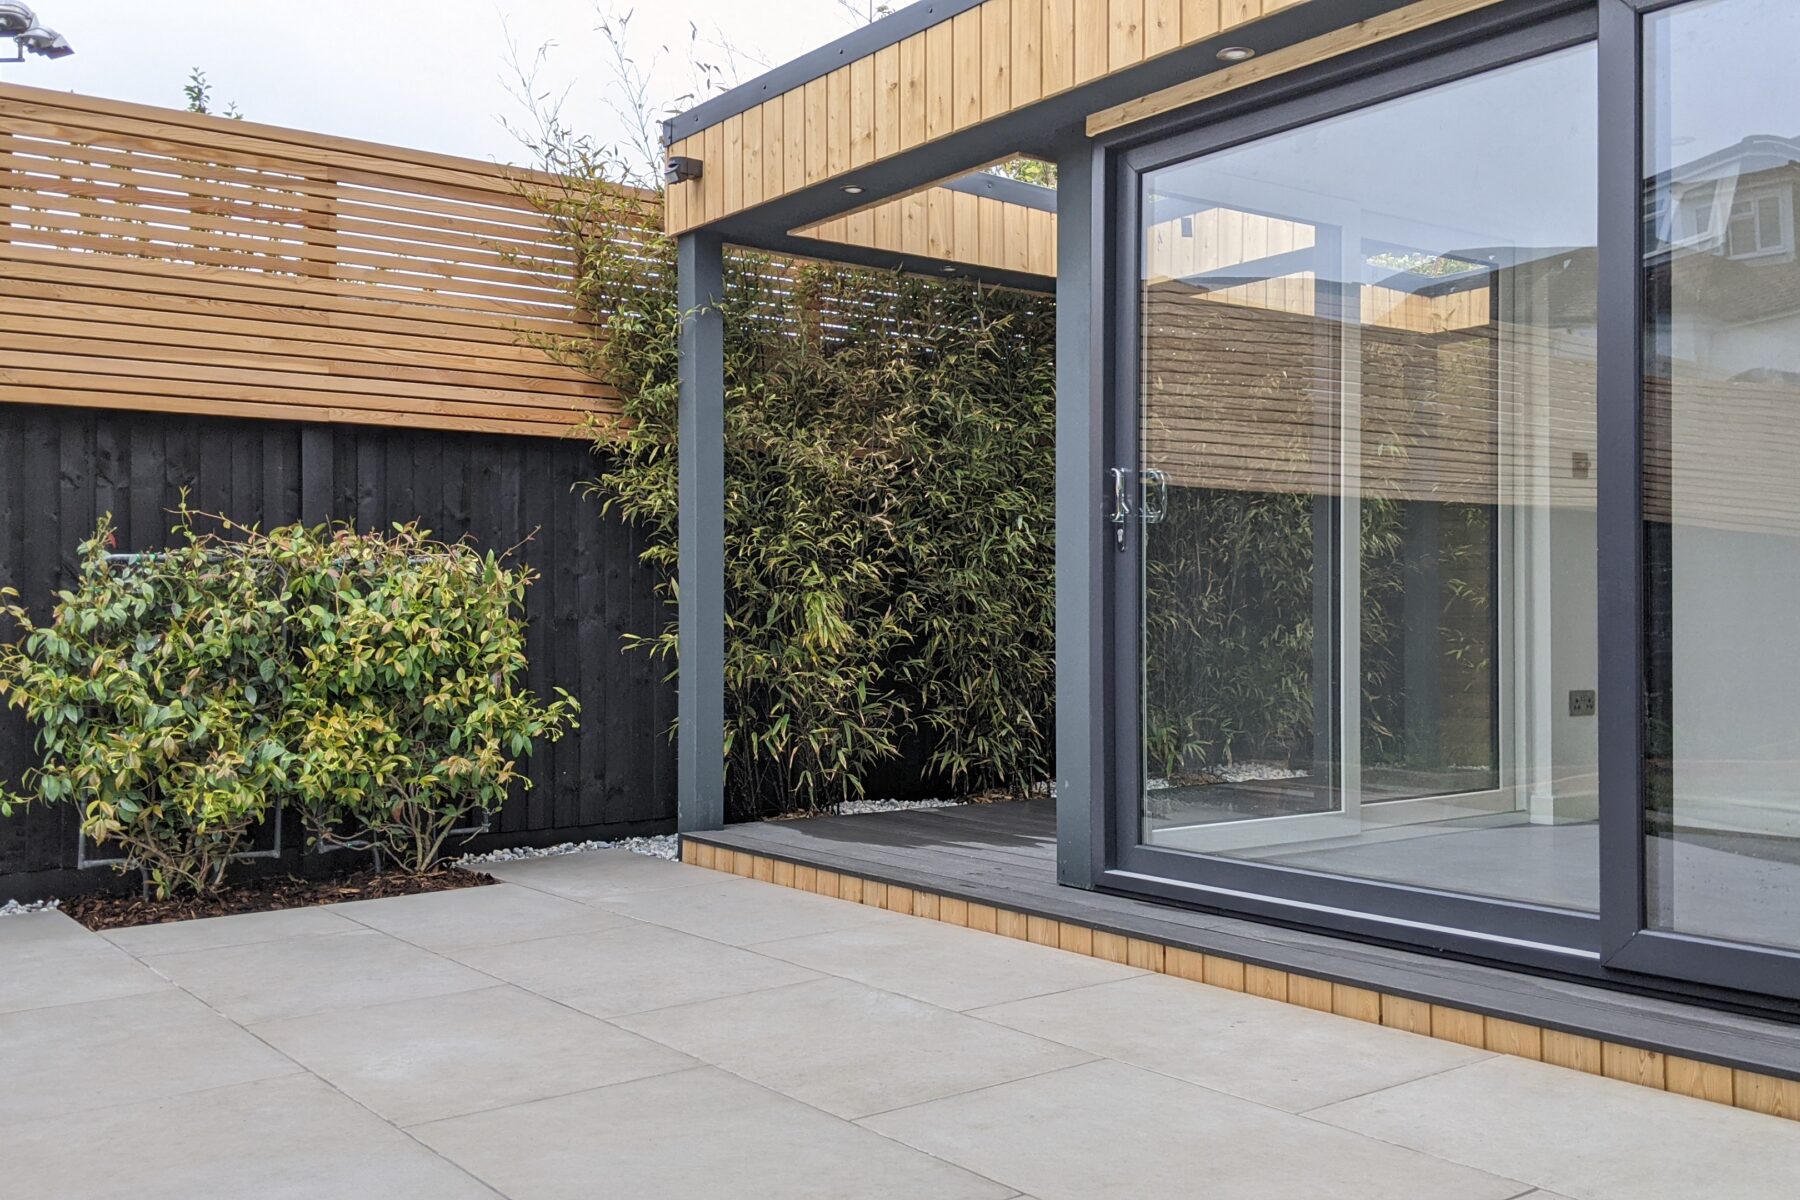 Exterior view of large garden office with anthracite grey sliding doors and tiled patio, situated close to a black and tan wall with a creeper plant growing on it.